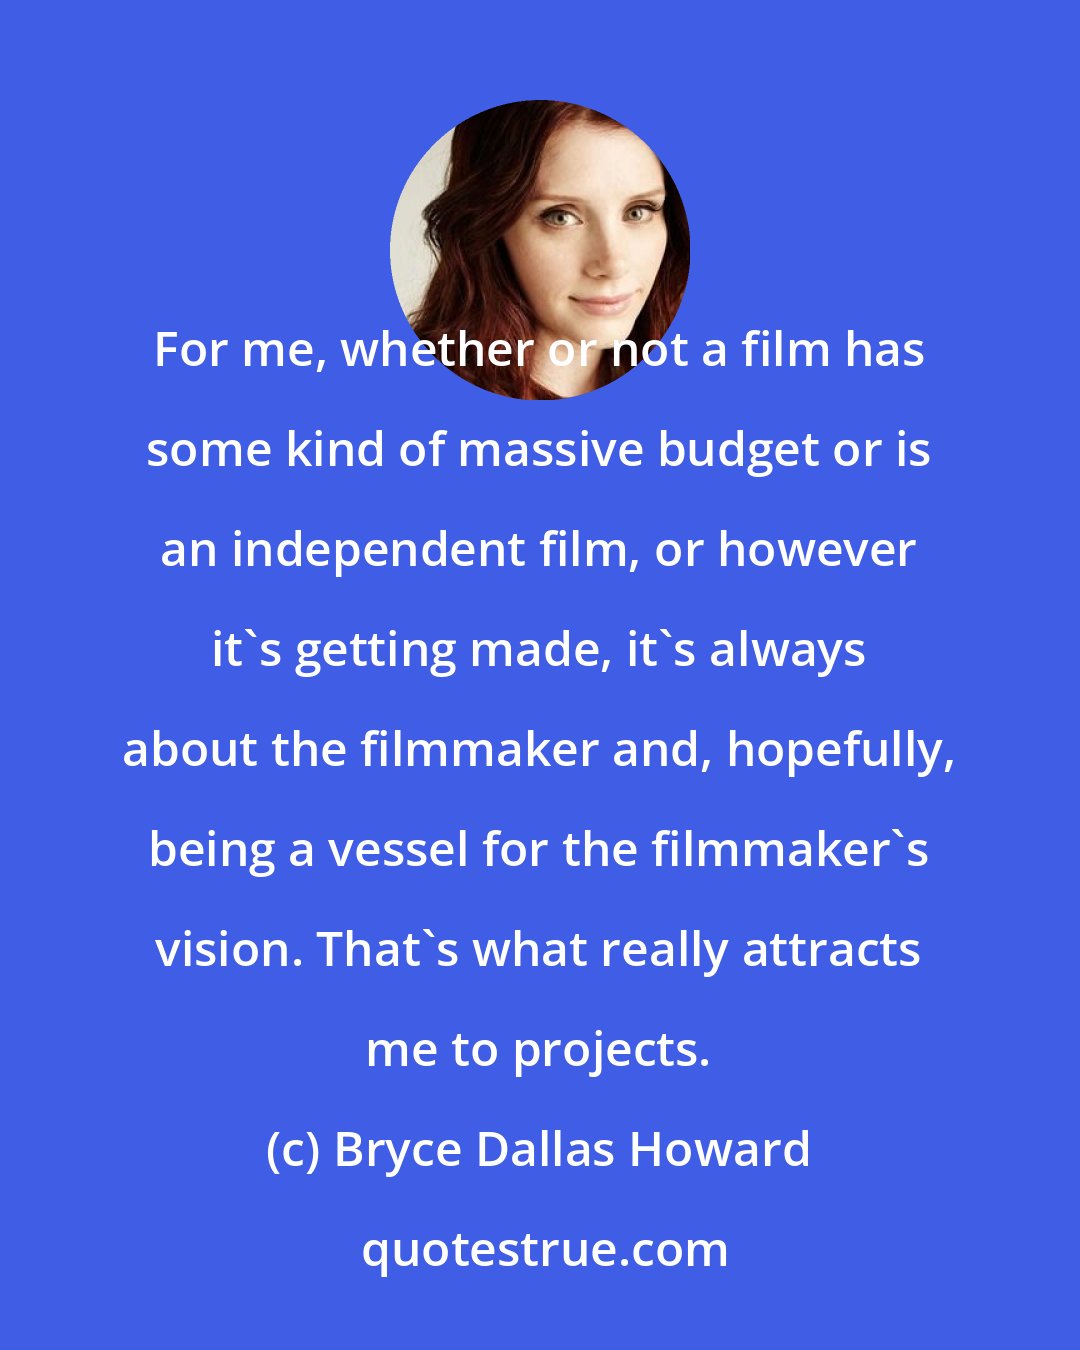 Bryce Dallas Howard: For me, whether or not a film has some kind of massive budget or is an independent film, or however it's getting made, it's always about the filmmaker and, hopefully, being a vessel for the filmmaker's vision. That's what really attracts me to projects.